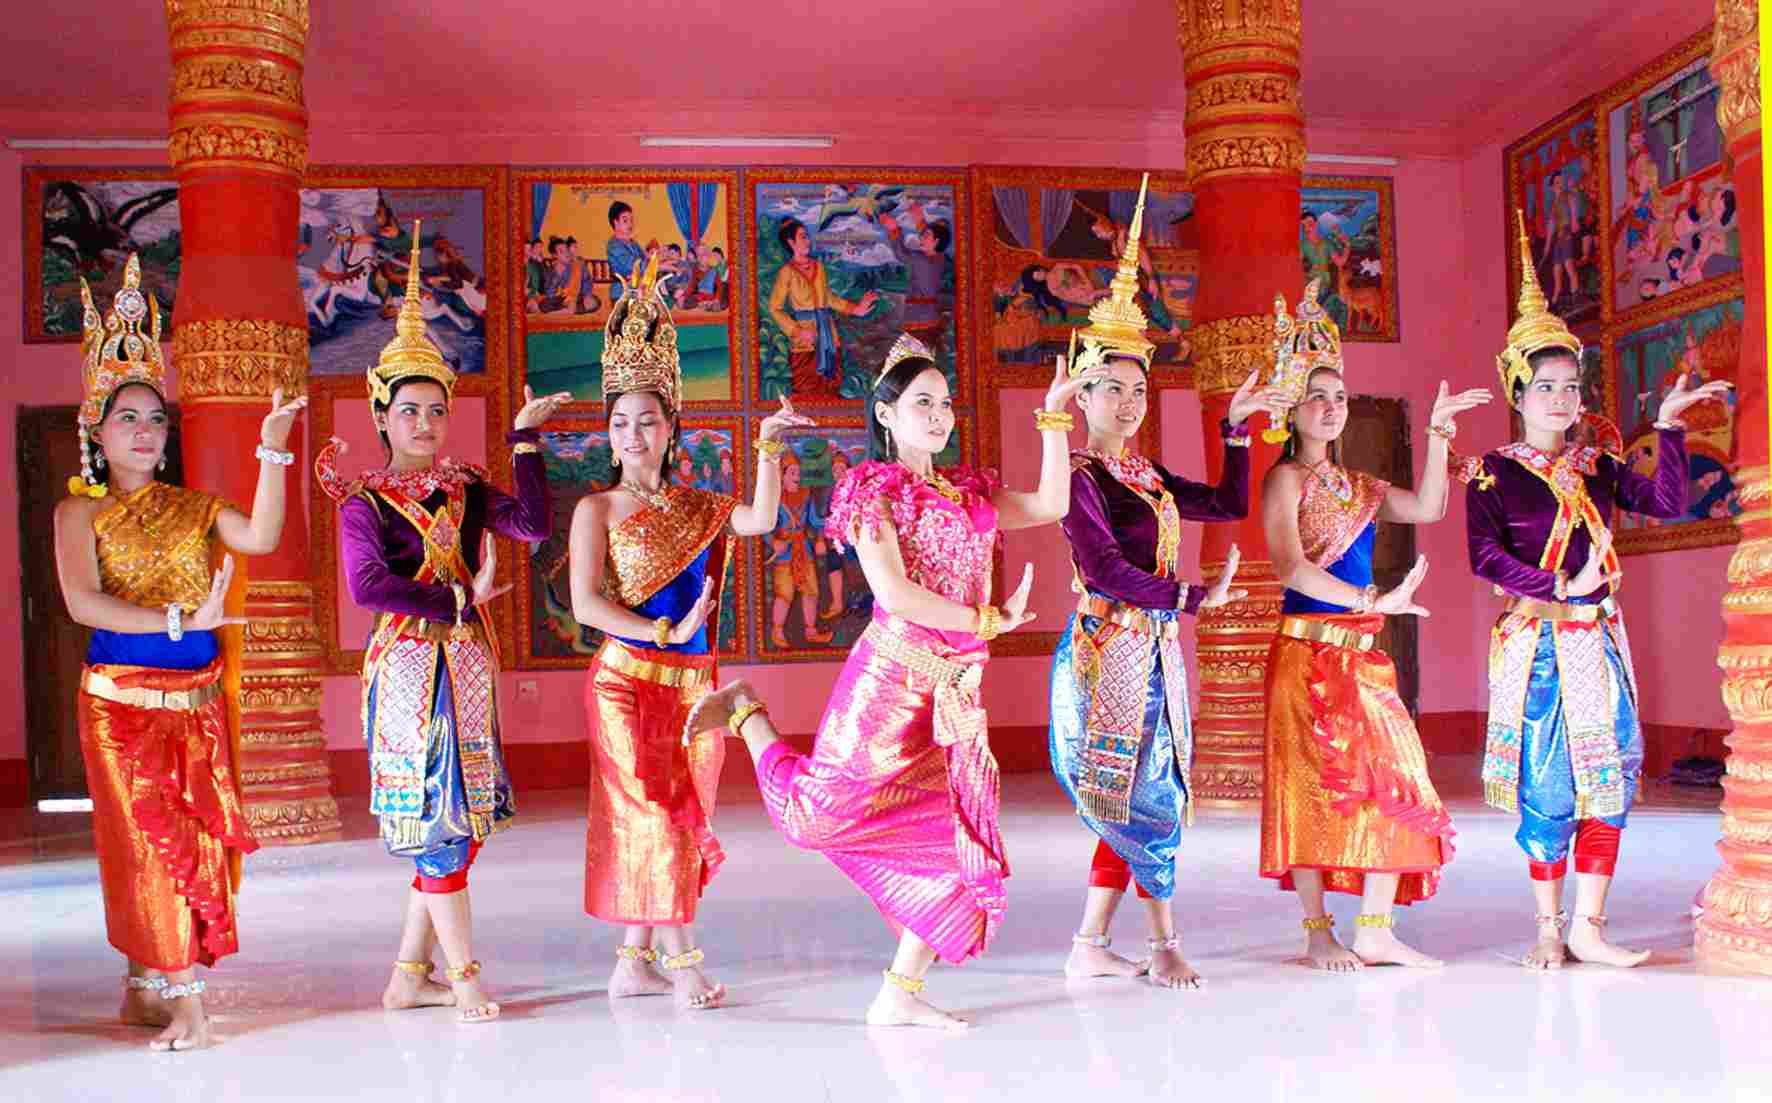 Festival looks to promote southern Khmer ethnic culture